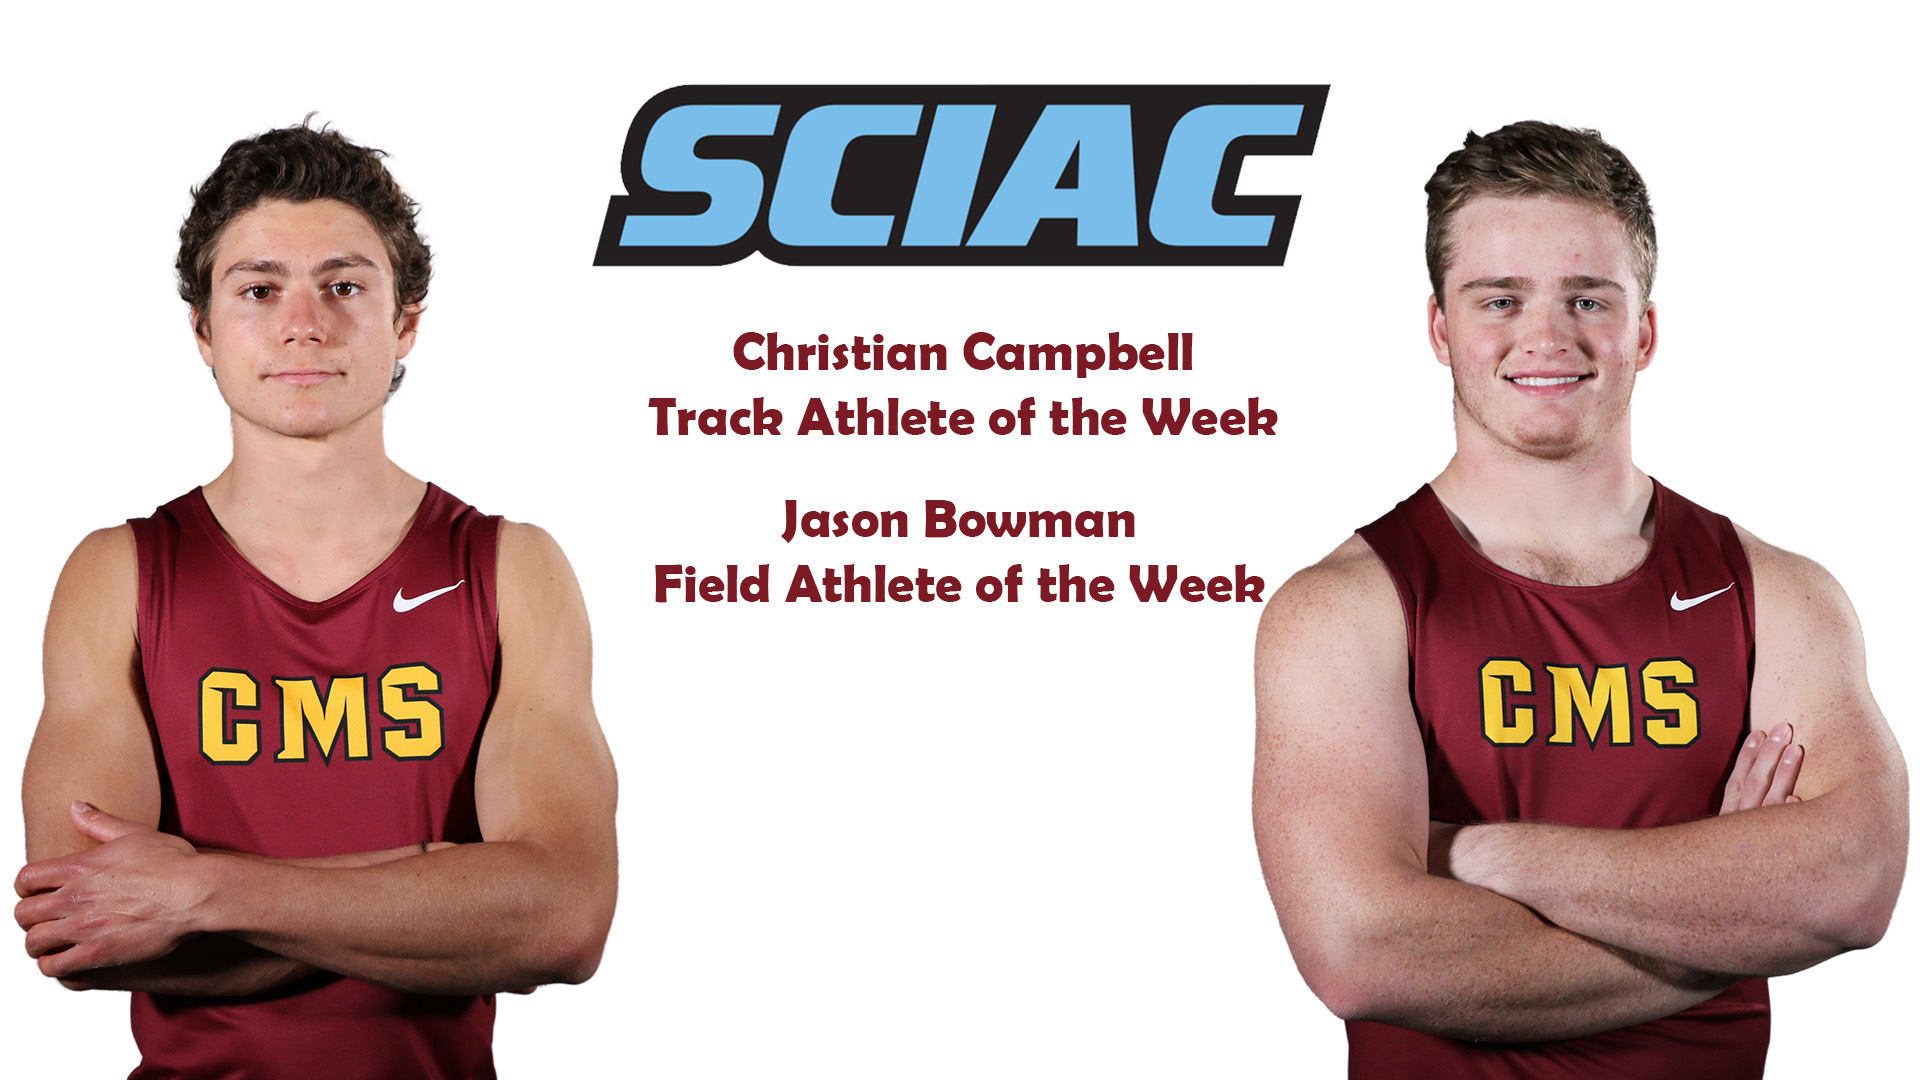 Posed shots of Christian Campbell and Jason Bowman with the SCIAC logo